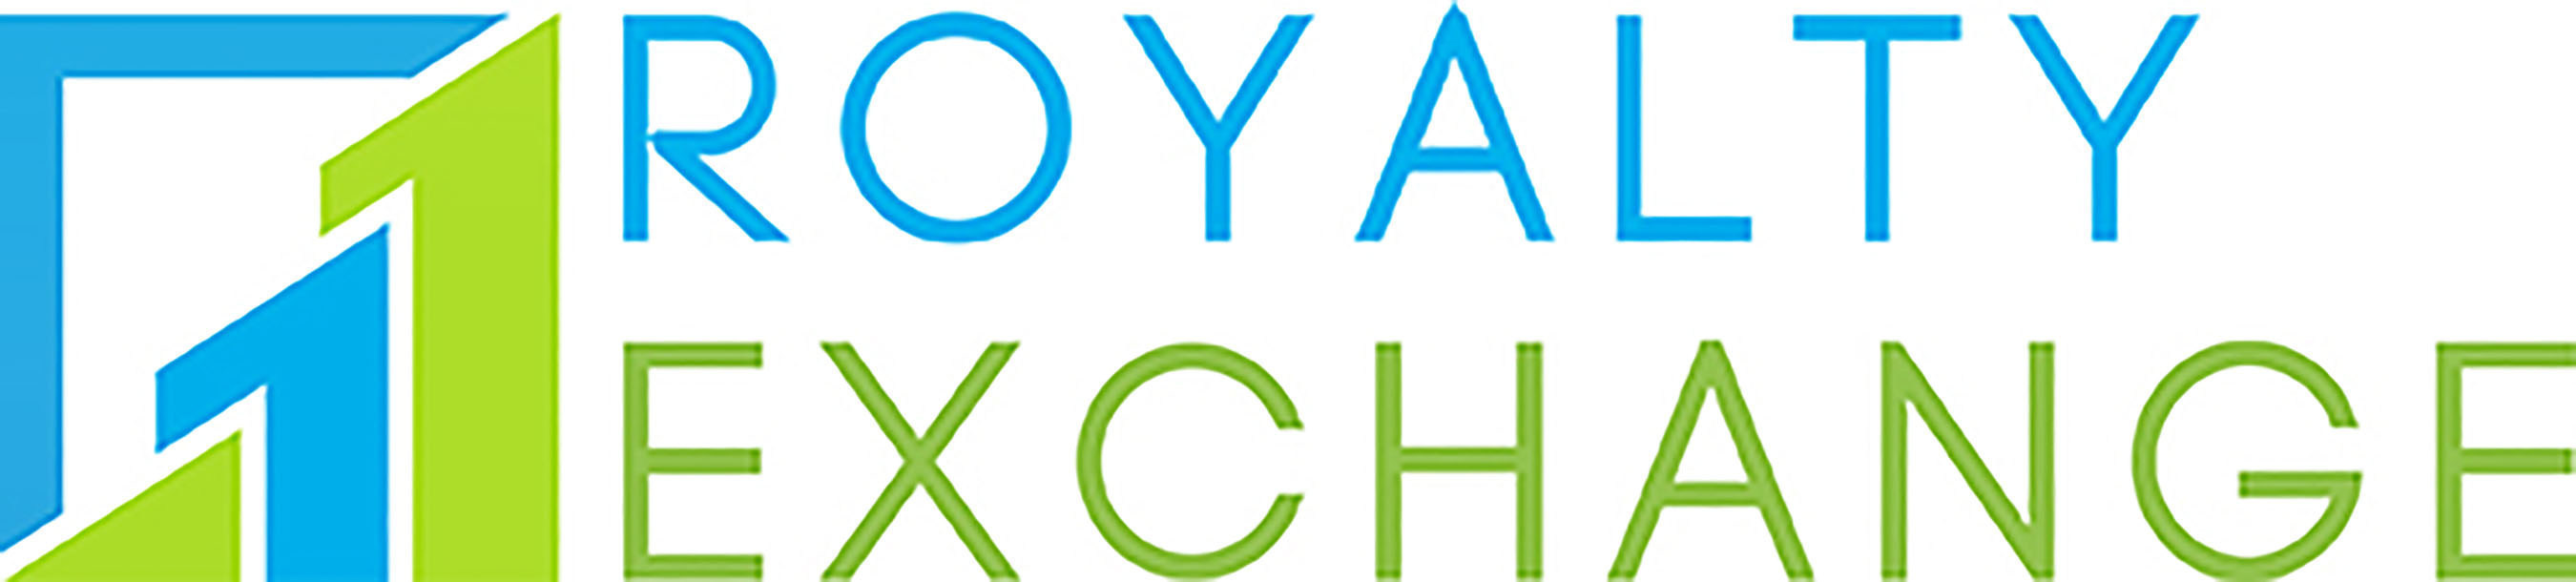 Royalty Exchange - Your Online Marketplace for Royalty Investments